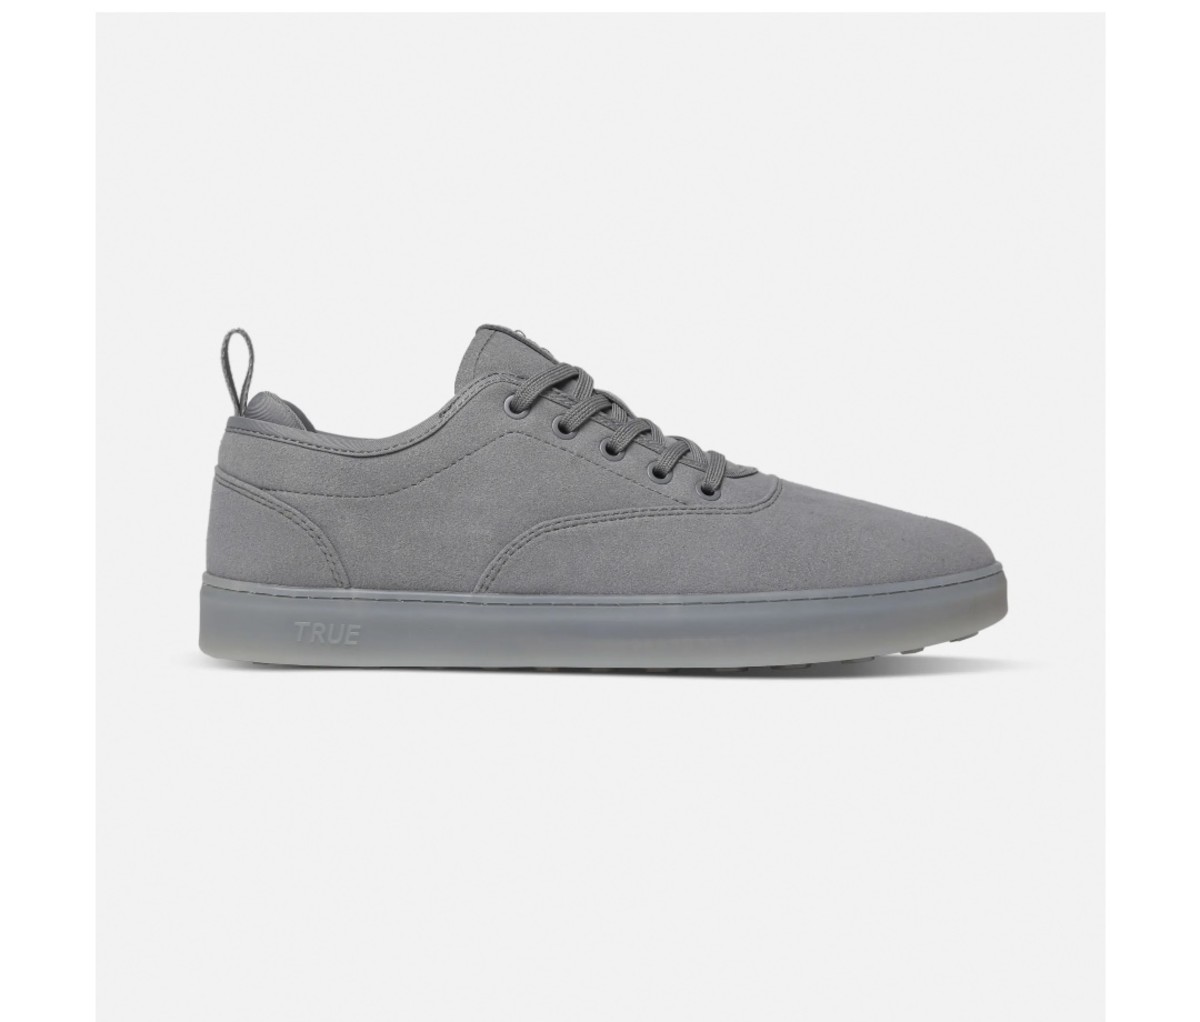 Gray golf shoe on a white background.